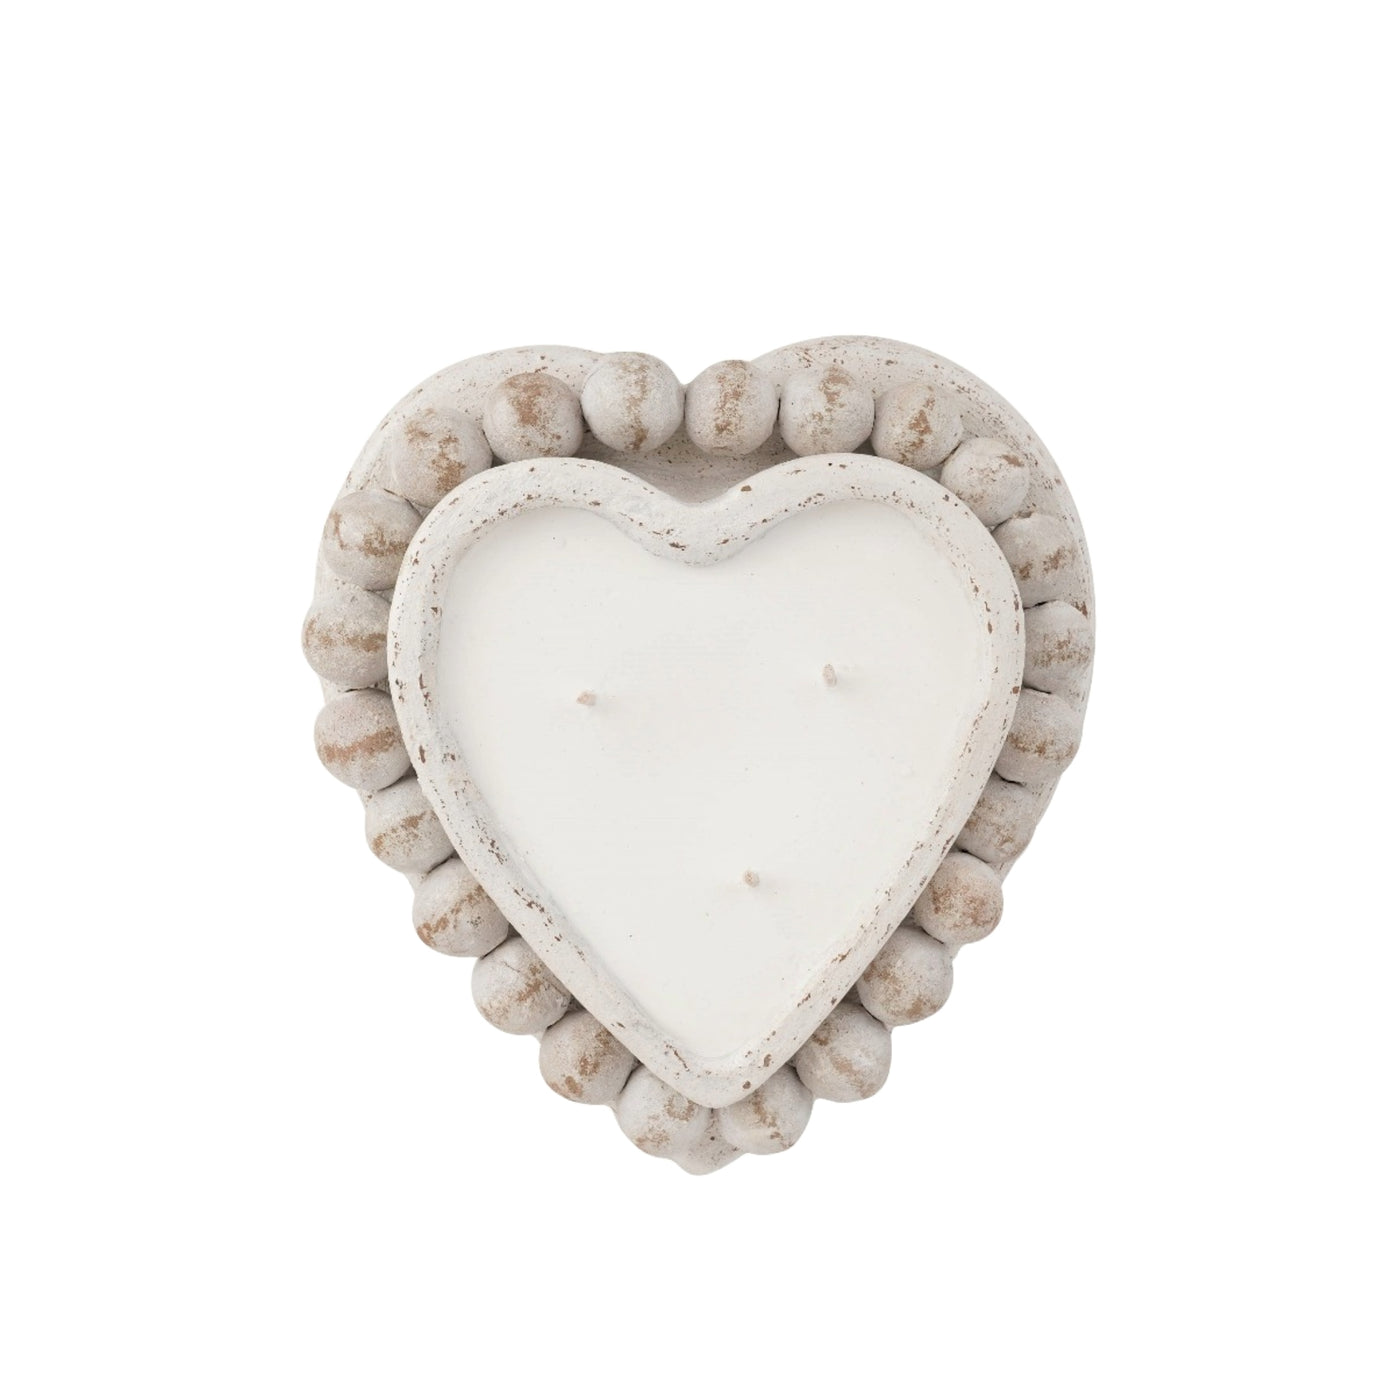 My Amigos Imports - Beading Heart™ - Candle Pour Clay Vessel in distressed white, SKU300 - candle-not-included